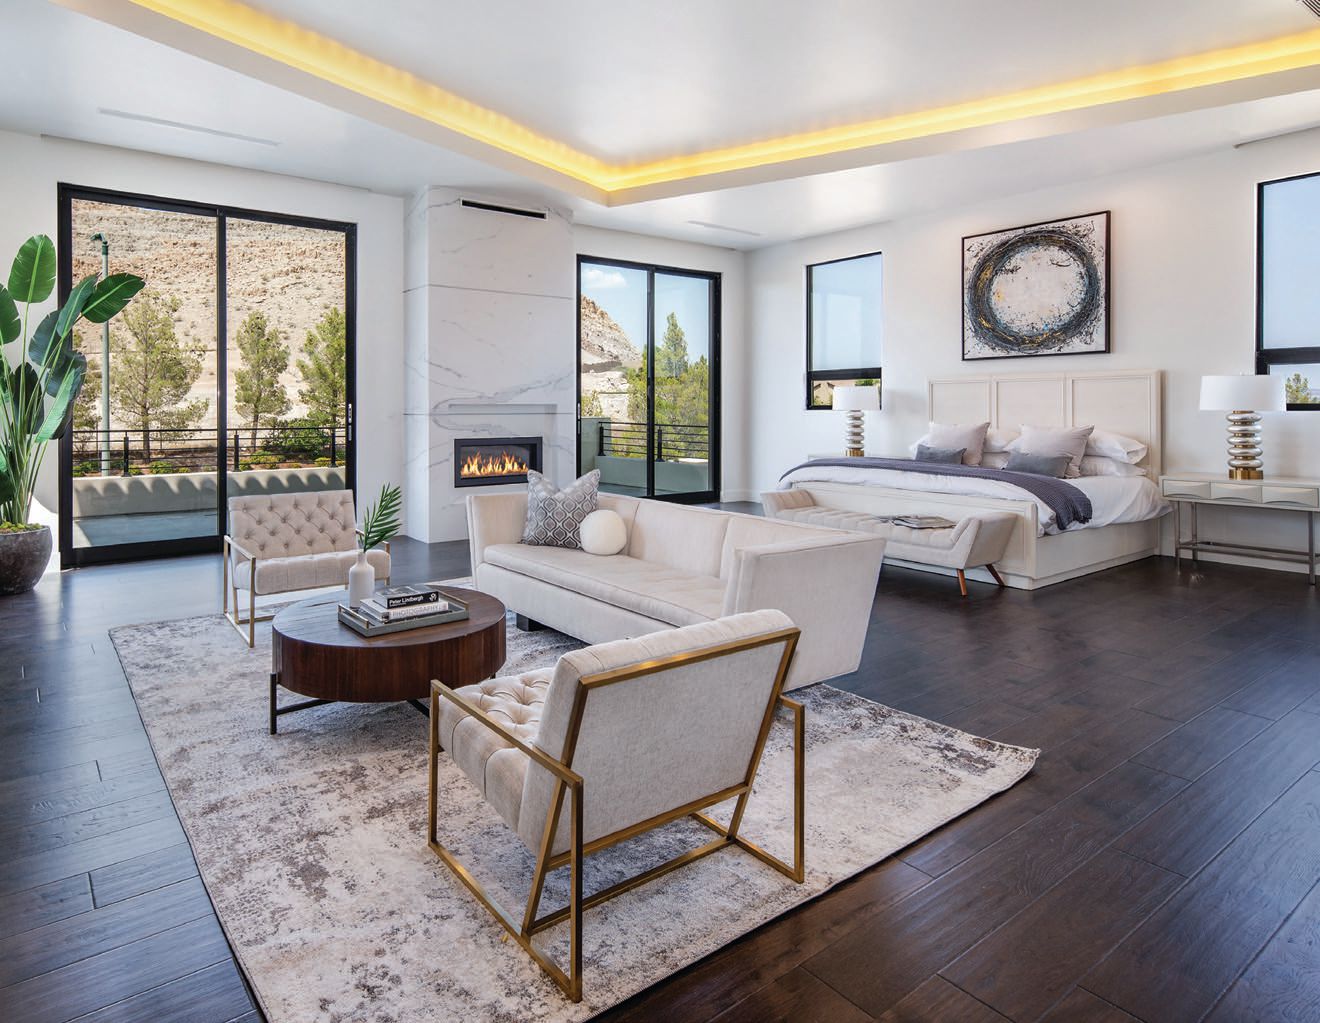 The expansive primary bedroom includes a sitting area and fireplace PHOTO COURTESY OF THE IVAN SHER GROUP